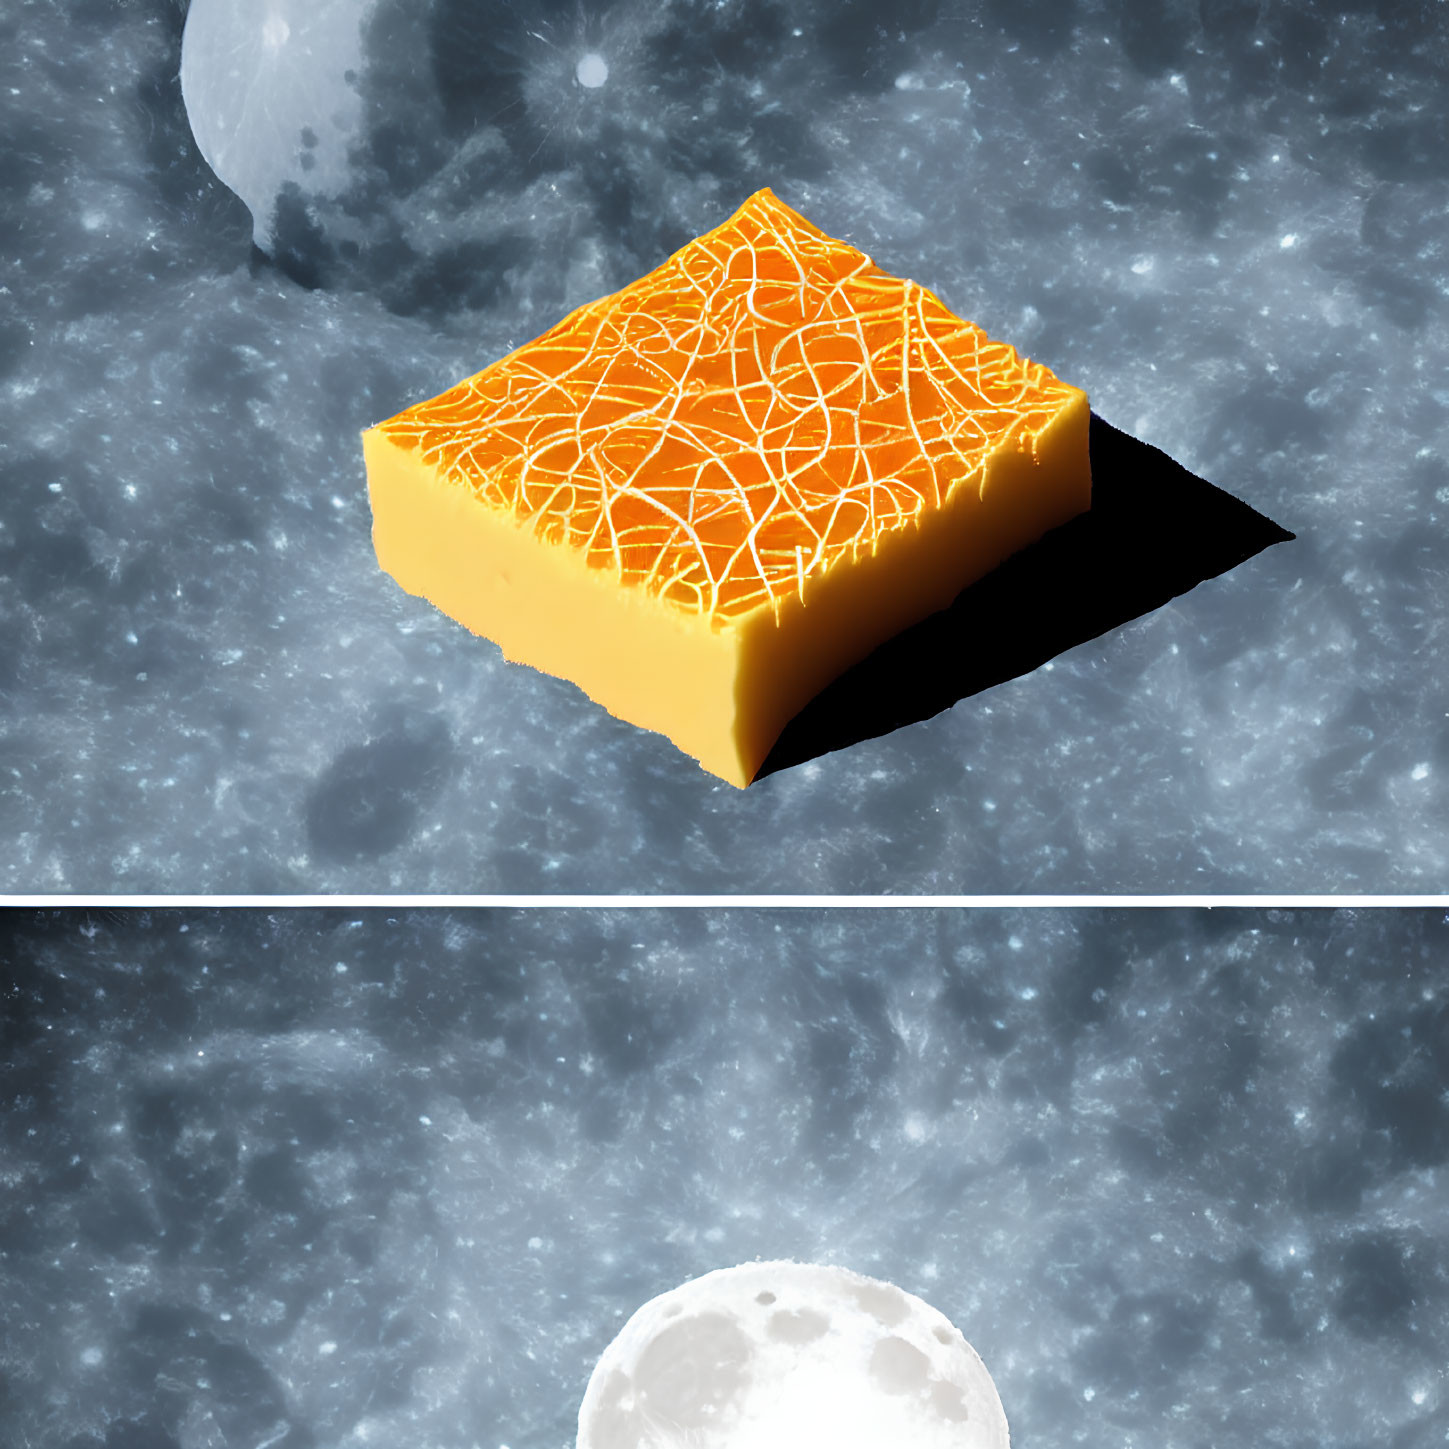 Surreal 3D slice of orange cheese on lunar landscape with Earth in background